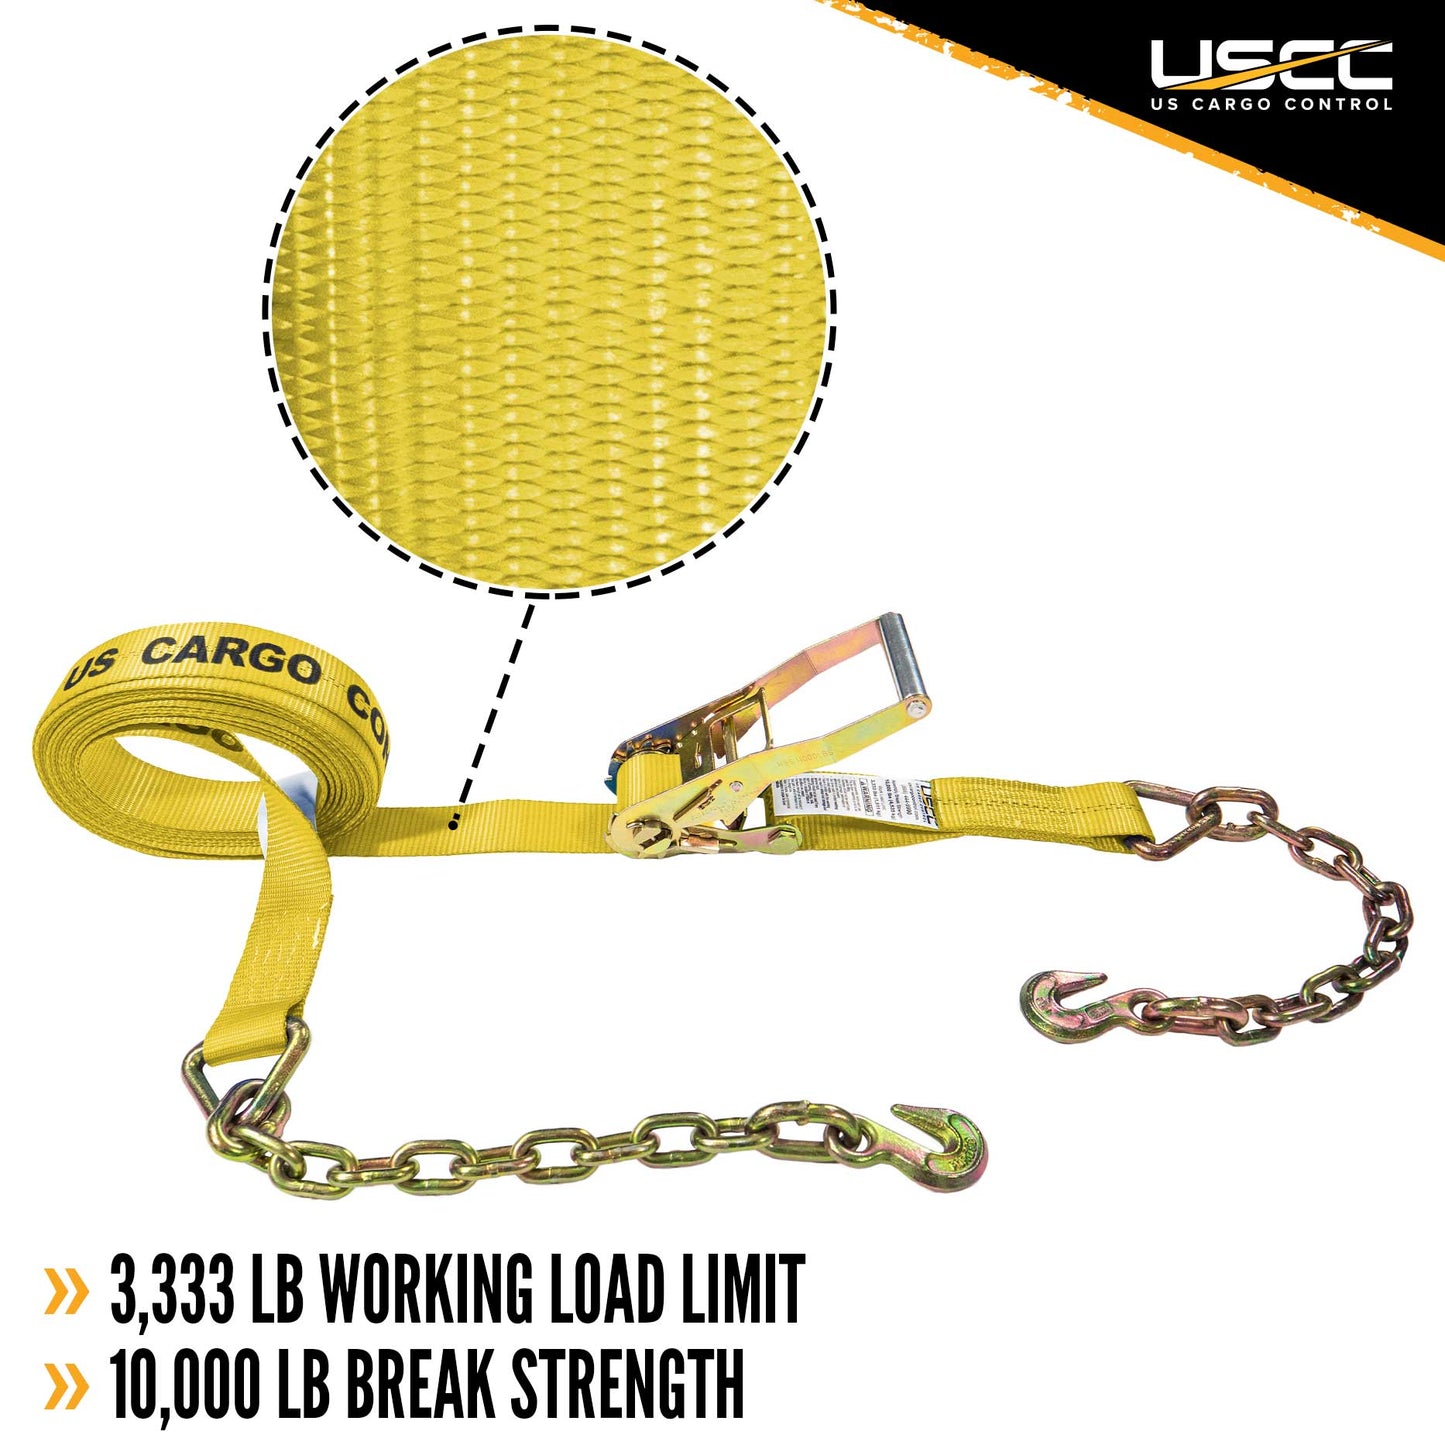 2" x 27' Yellow Ratchet Strap w/ Chain Extension